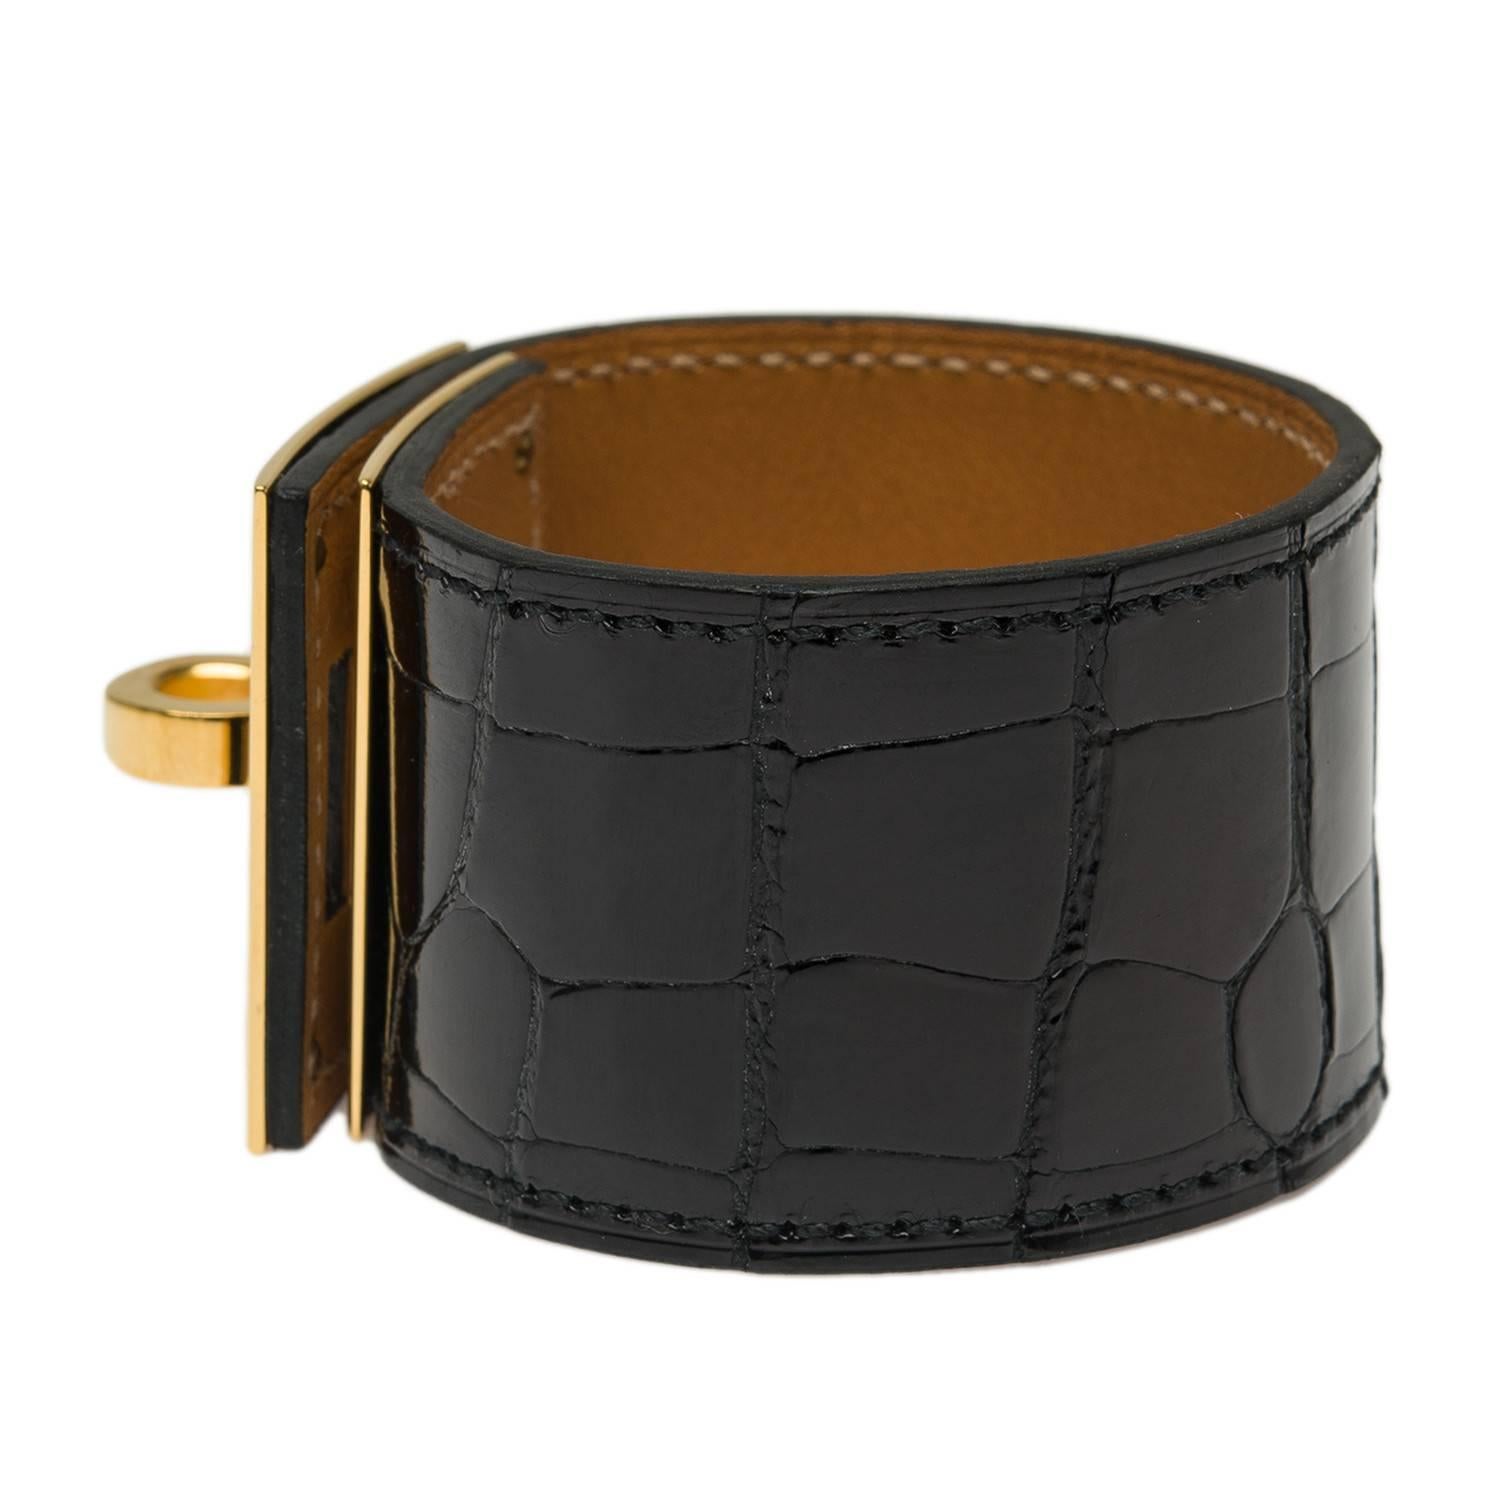 Hermes Kelly Dog Bracelet in black shiny alligator leather with gold plated hardware.

This bracelet features an adjustable front plate with a toggle closure.

Origin: France

Condition: Pristine; never worn

Accompanied by: Hermes box, dustbag,